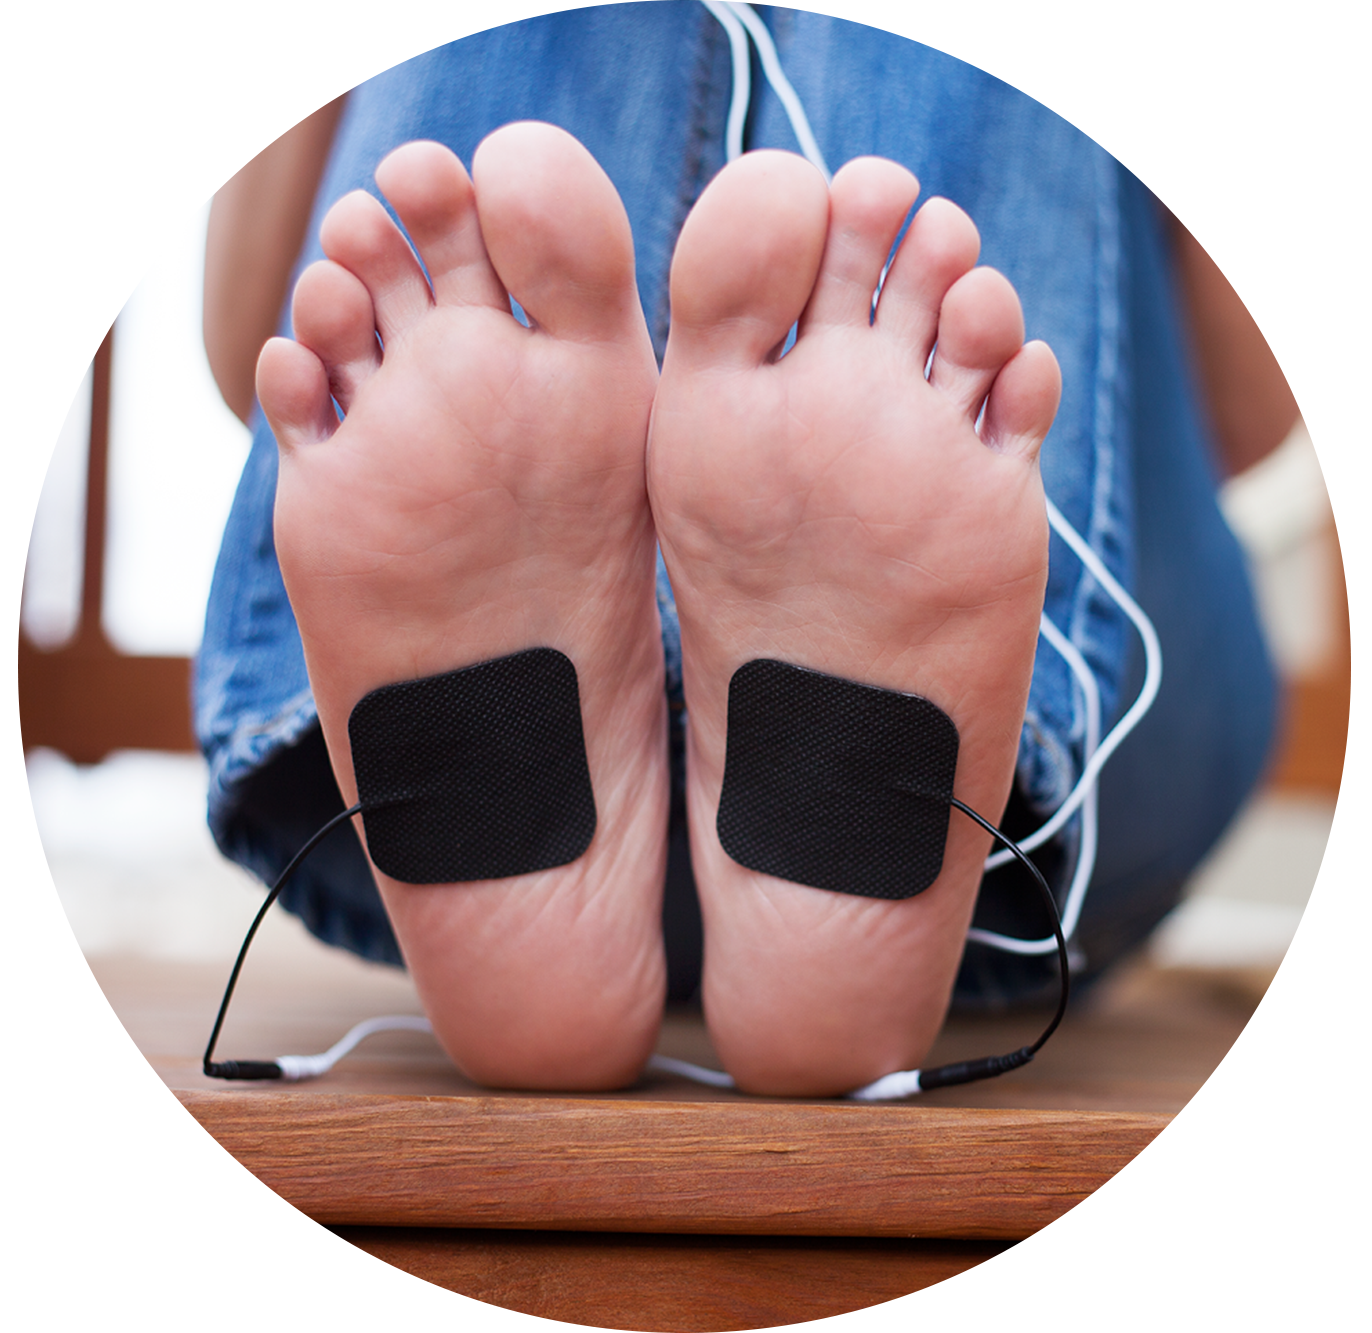 TENS Therapy for Feet DrugFree Plantar Fasciitis Relief iReliev